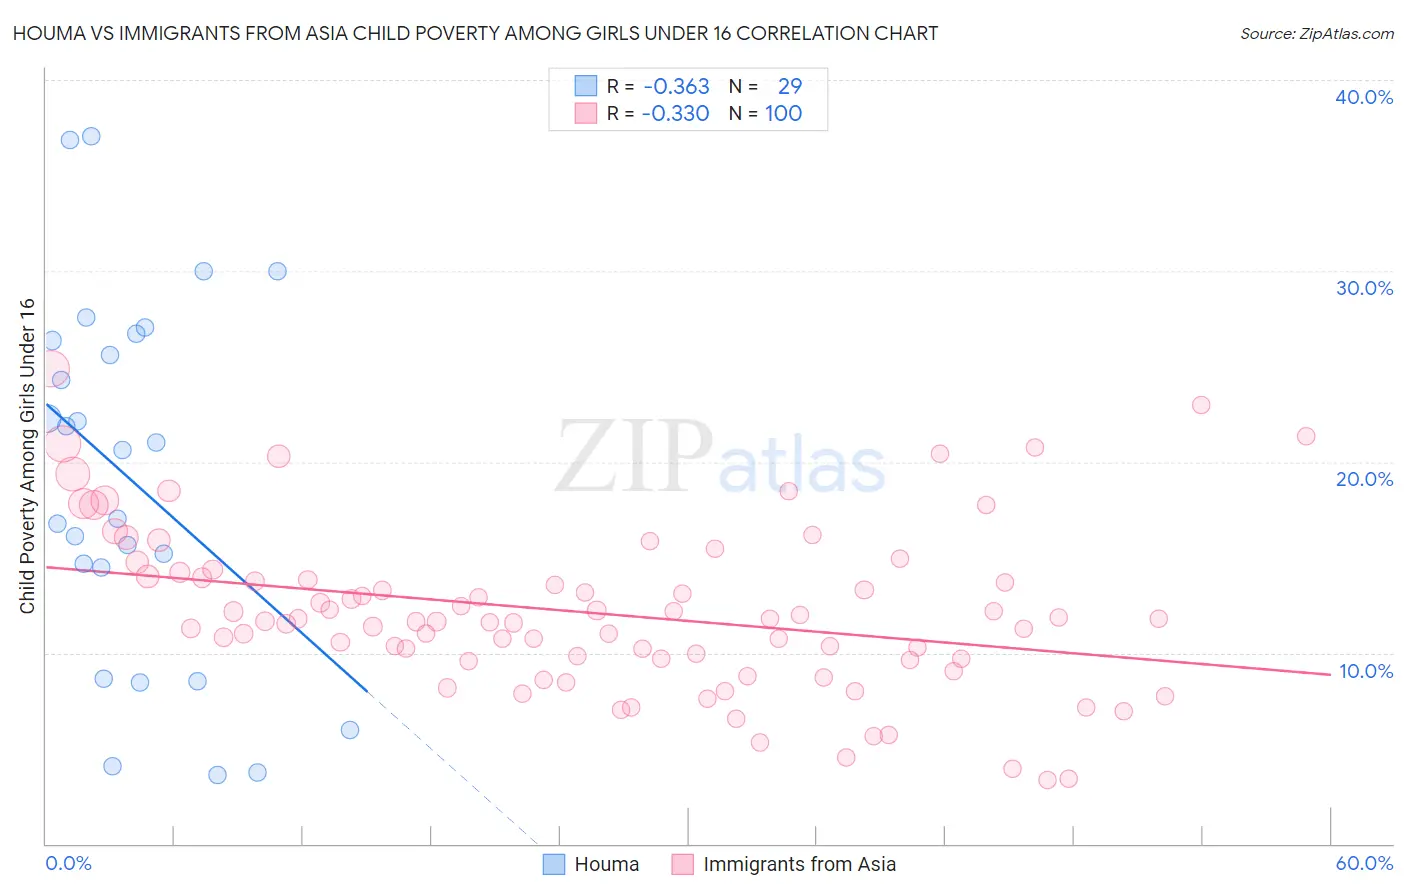 Houma vs Immigrants from Asia Child Poverty Among Girls Under 16